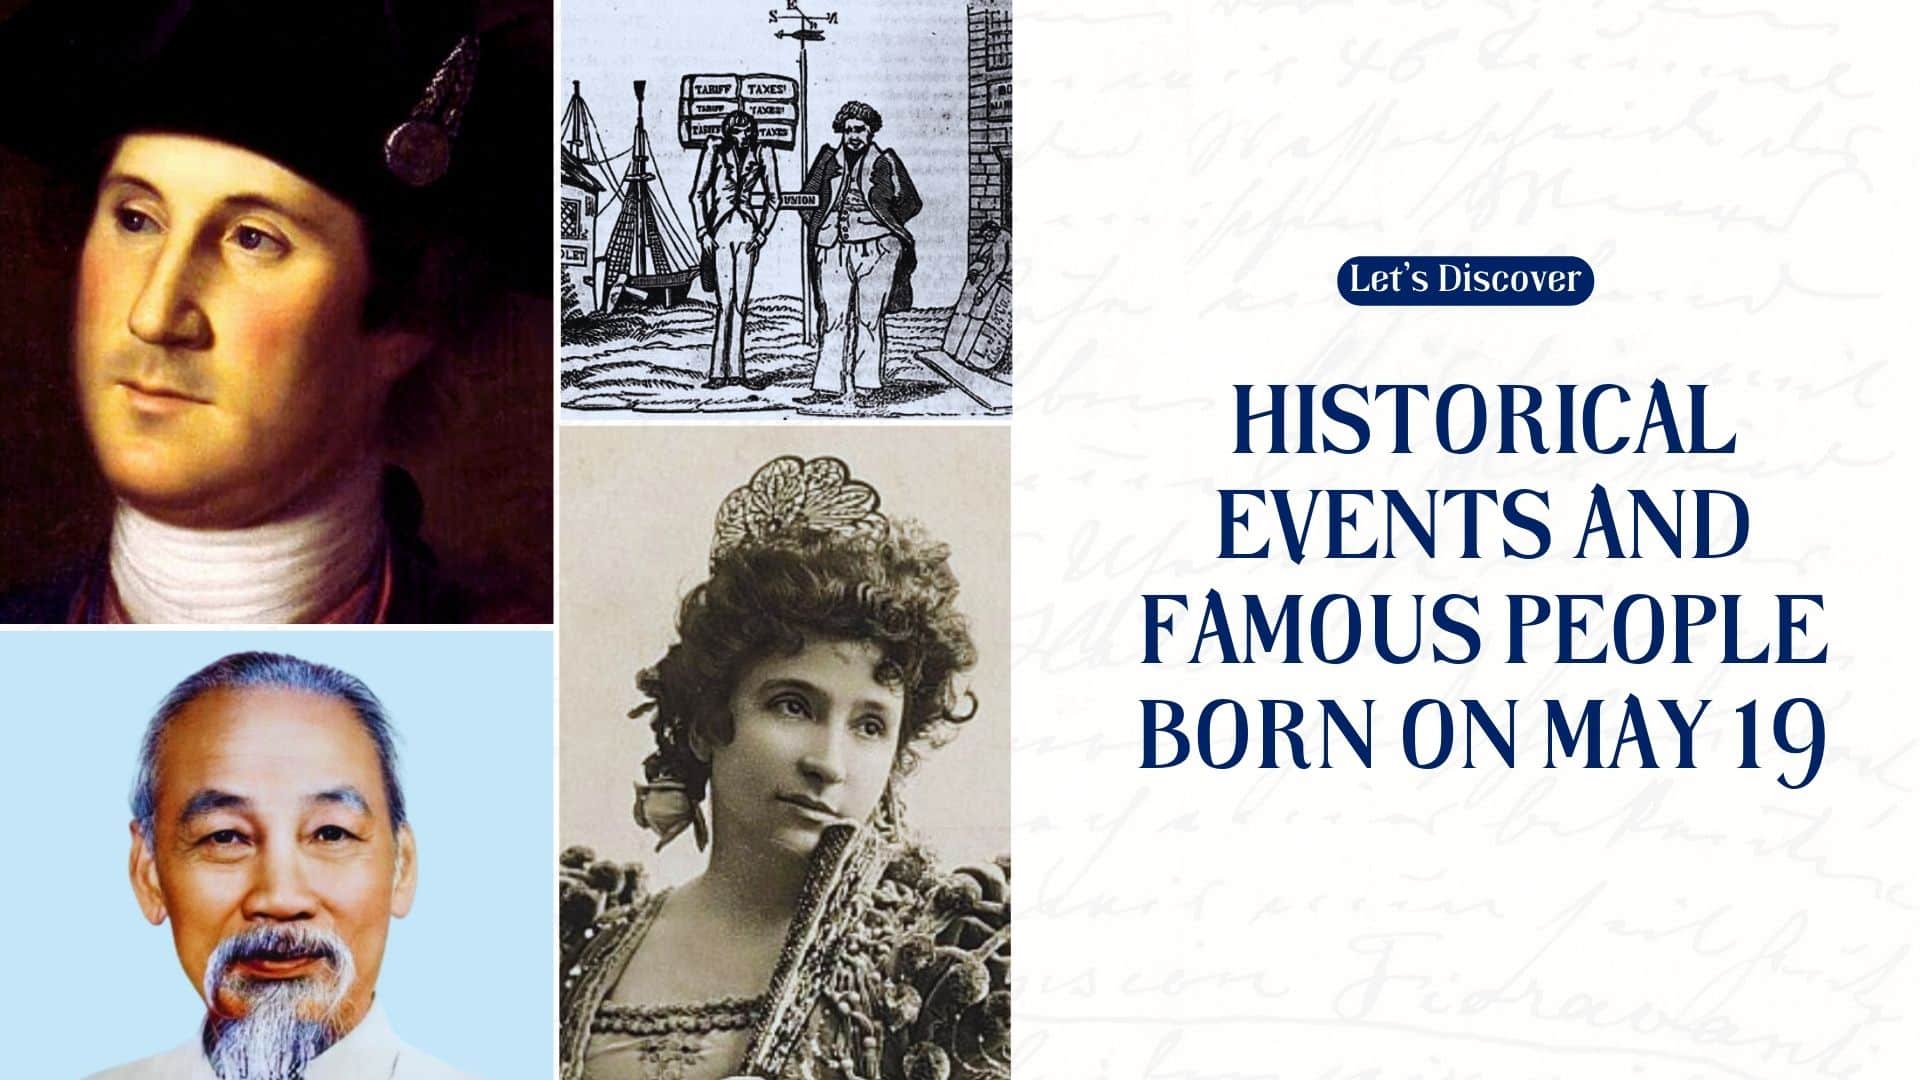 Historical Events and Famous People Born on May 19